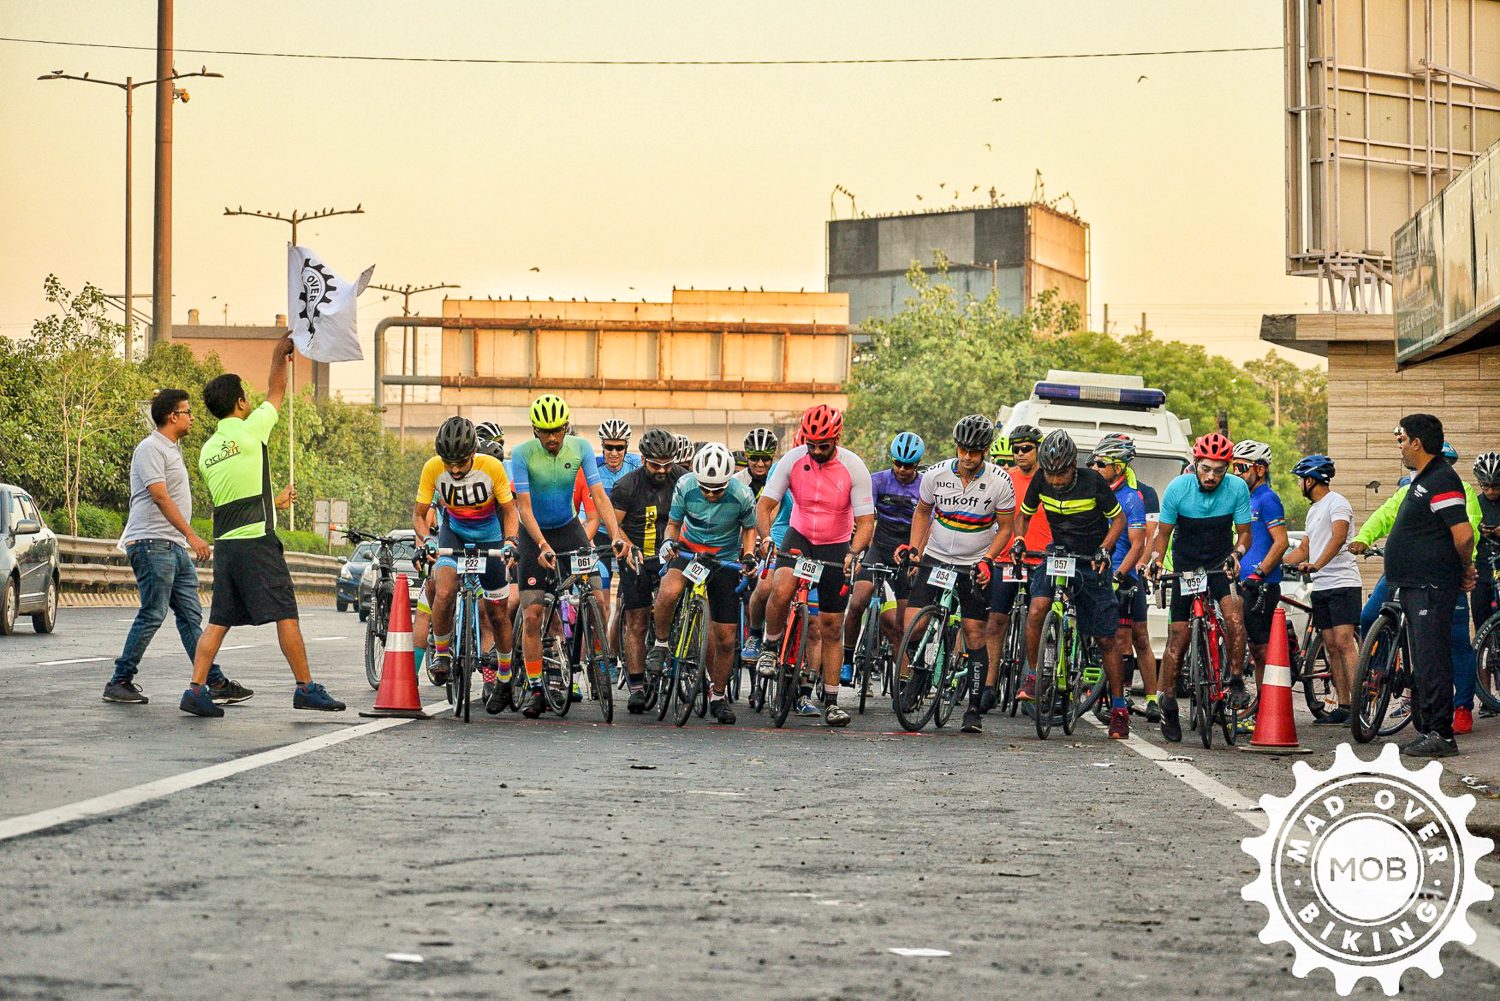 Mad Over Biking race at Greater Noida